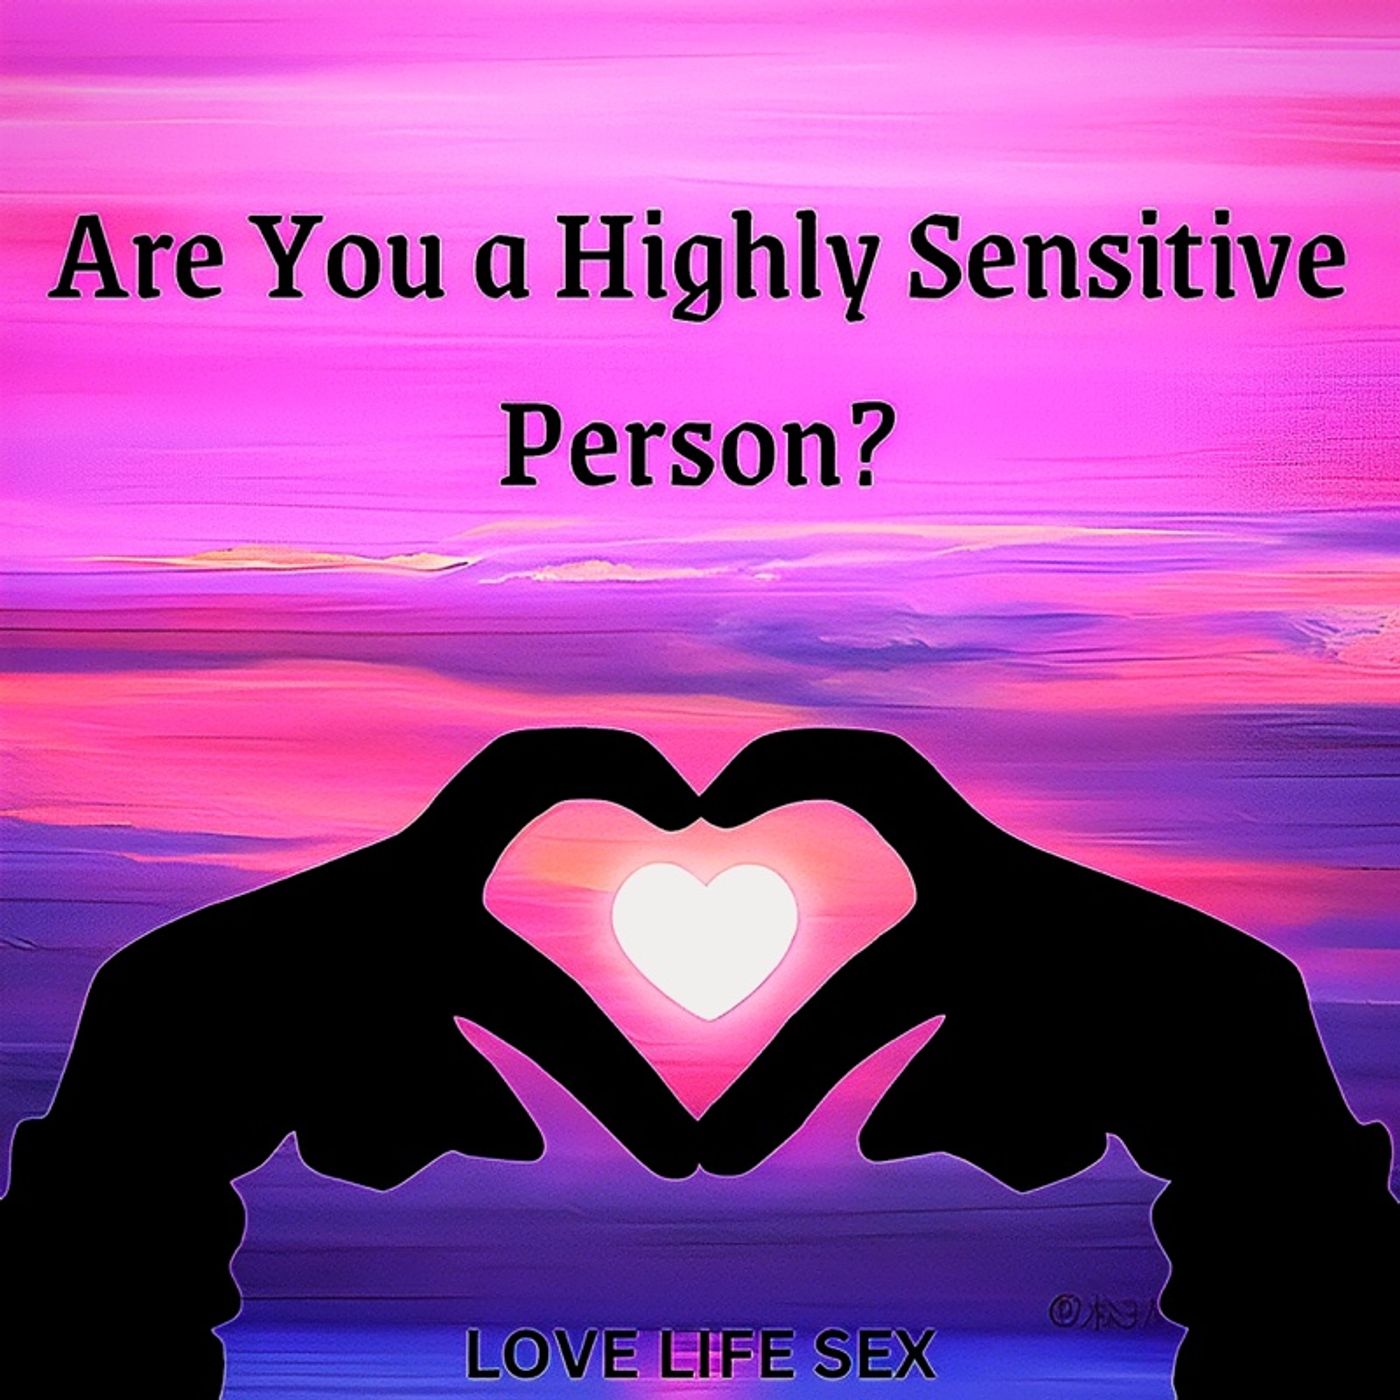 Are You a Highly Sensitive Person? 🤔